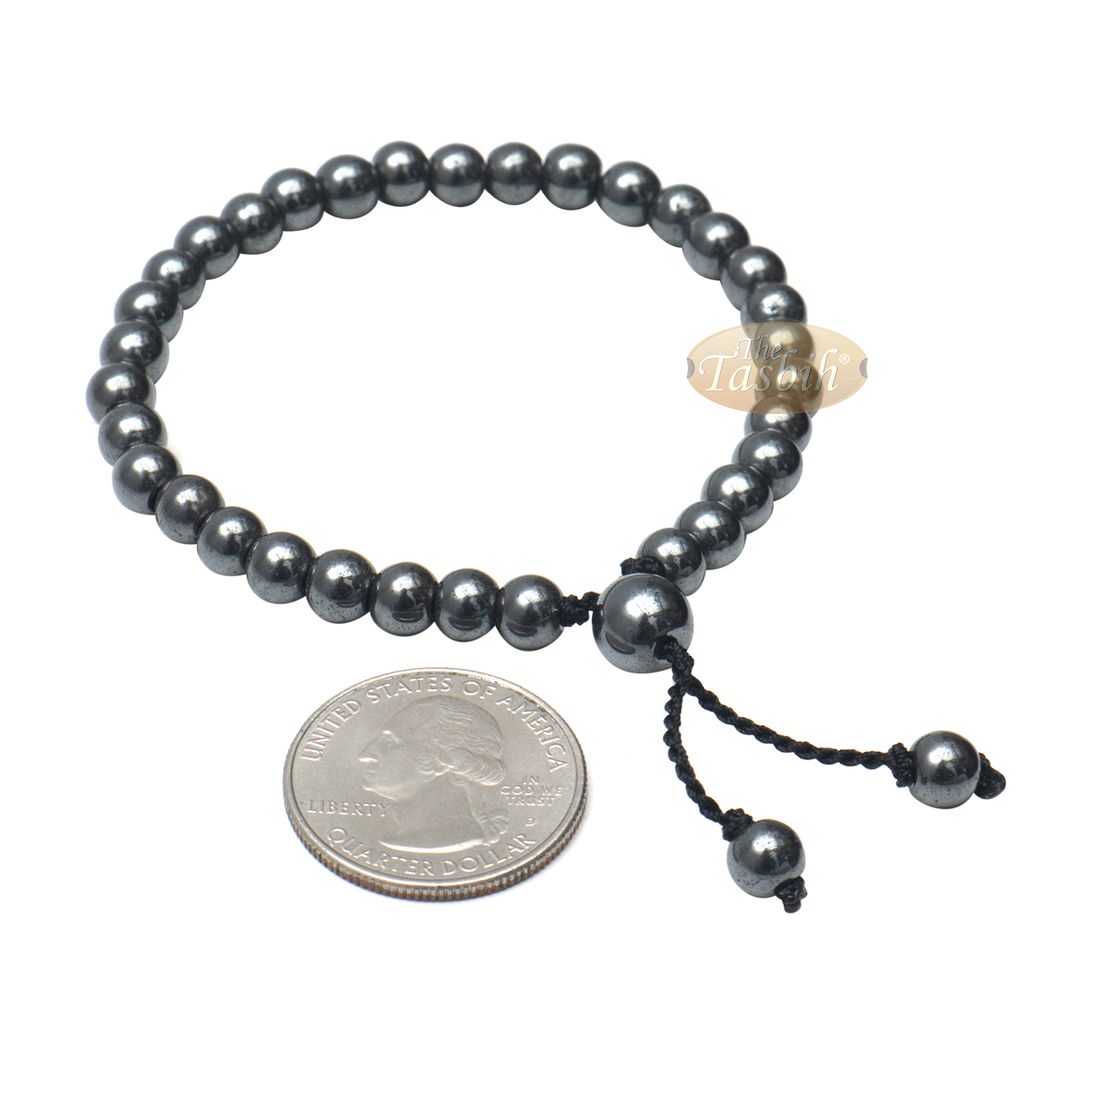 Stone Bracelet 33-bead Hematite 6mm Beads without Dividers Zikr